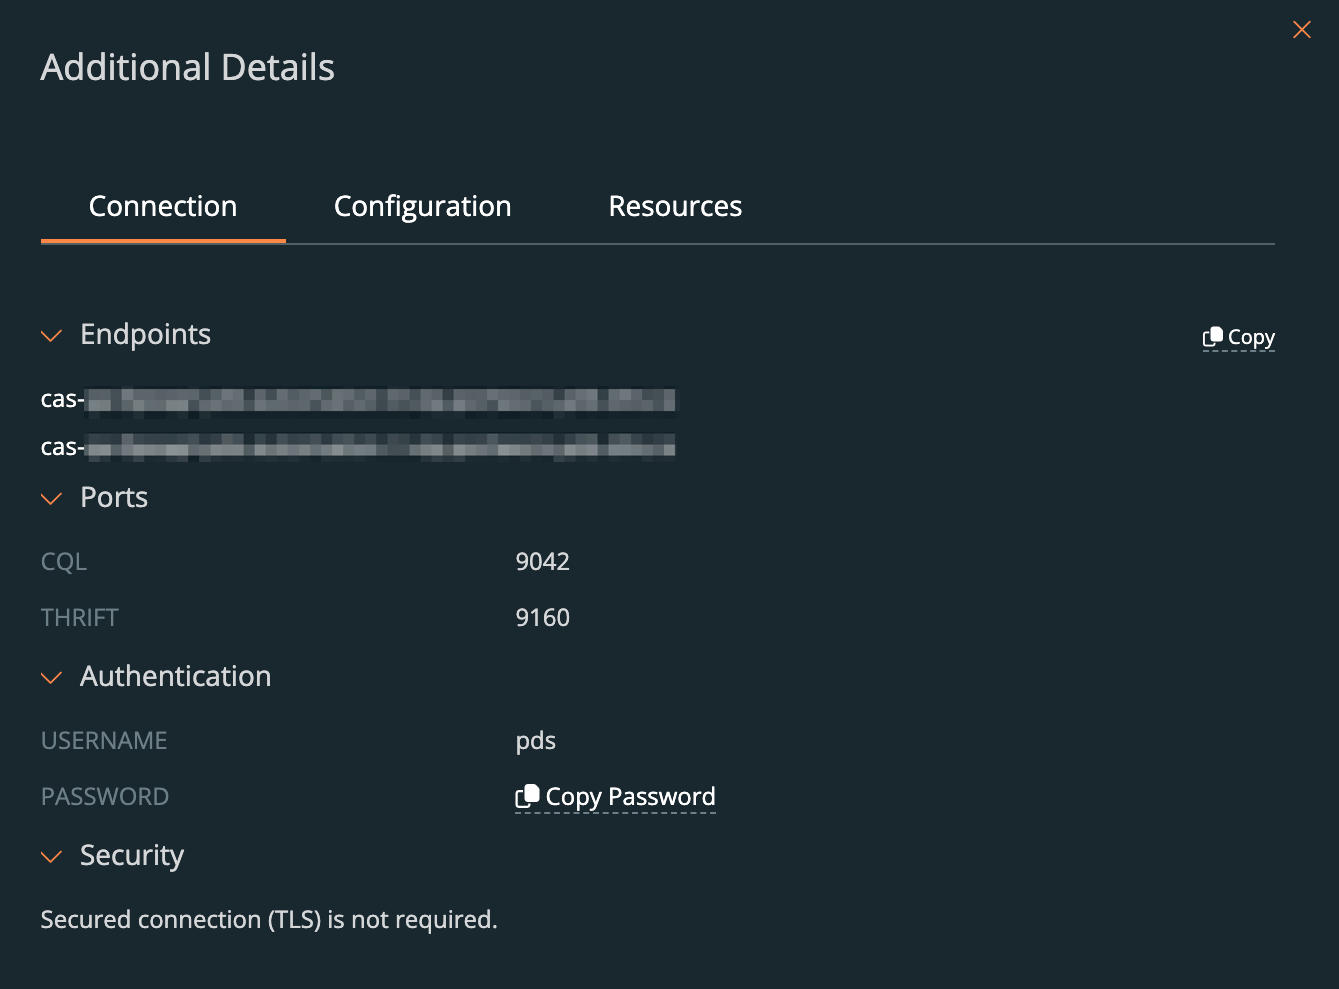 connection tab in the additional details option